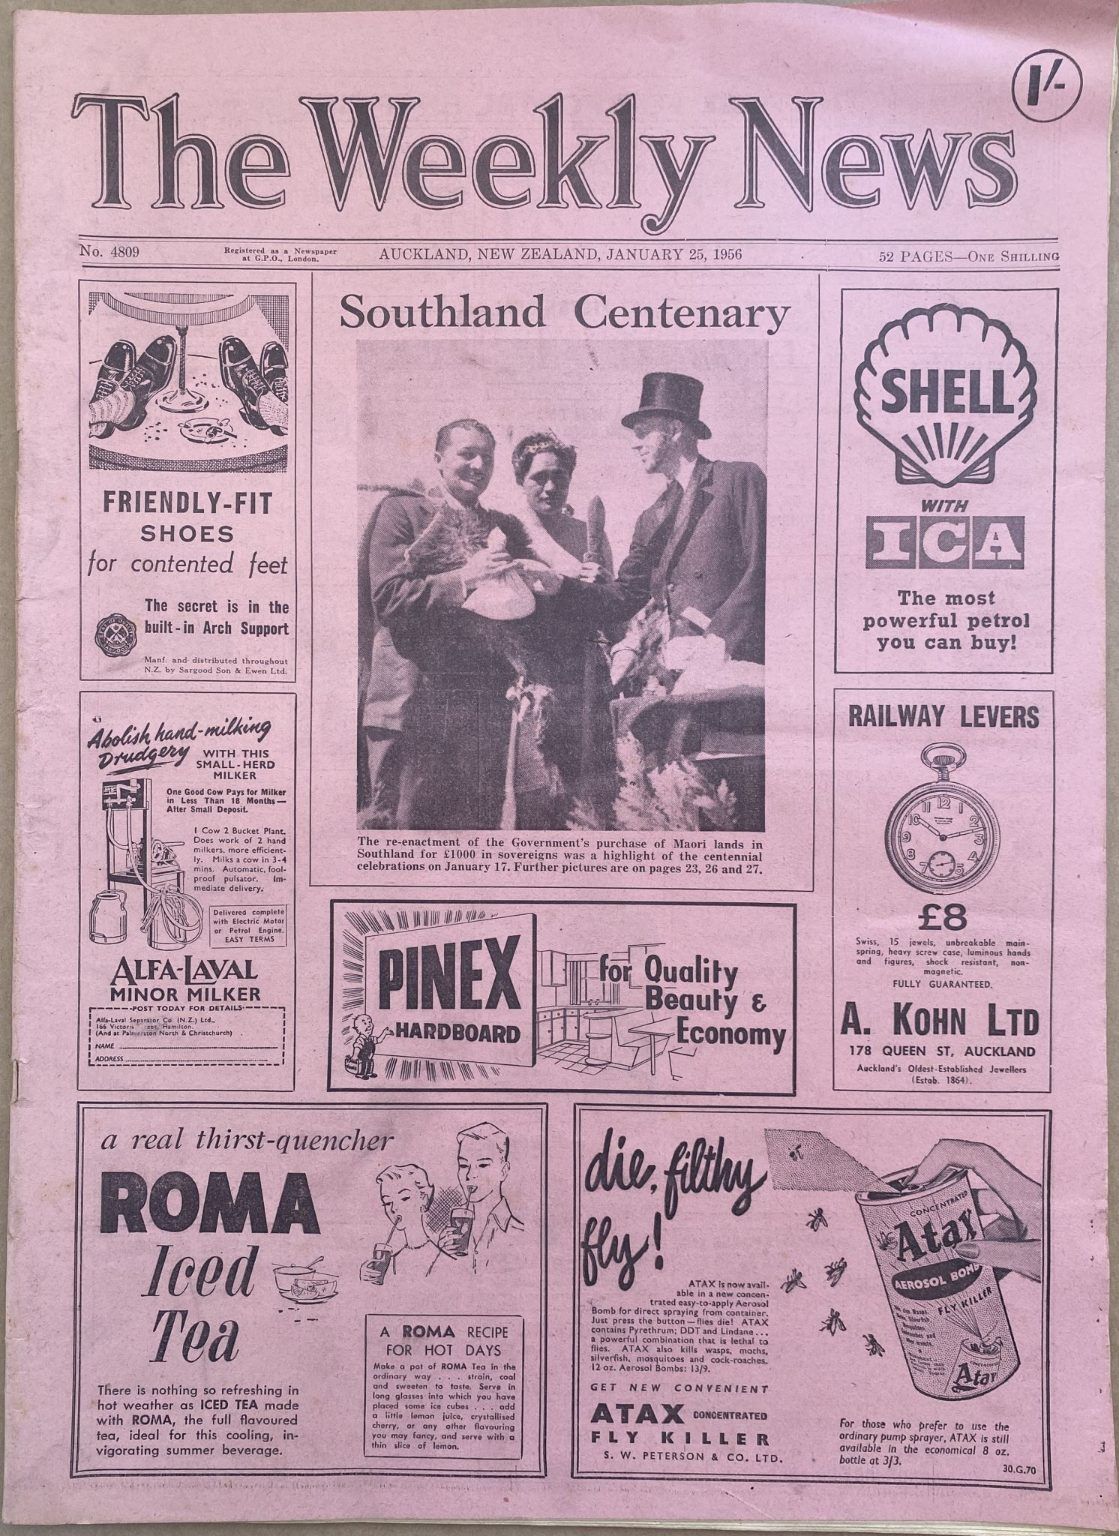 OLD NEWSPAPER: The Weekly News - No. 4809, 25 January 1956